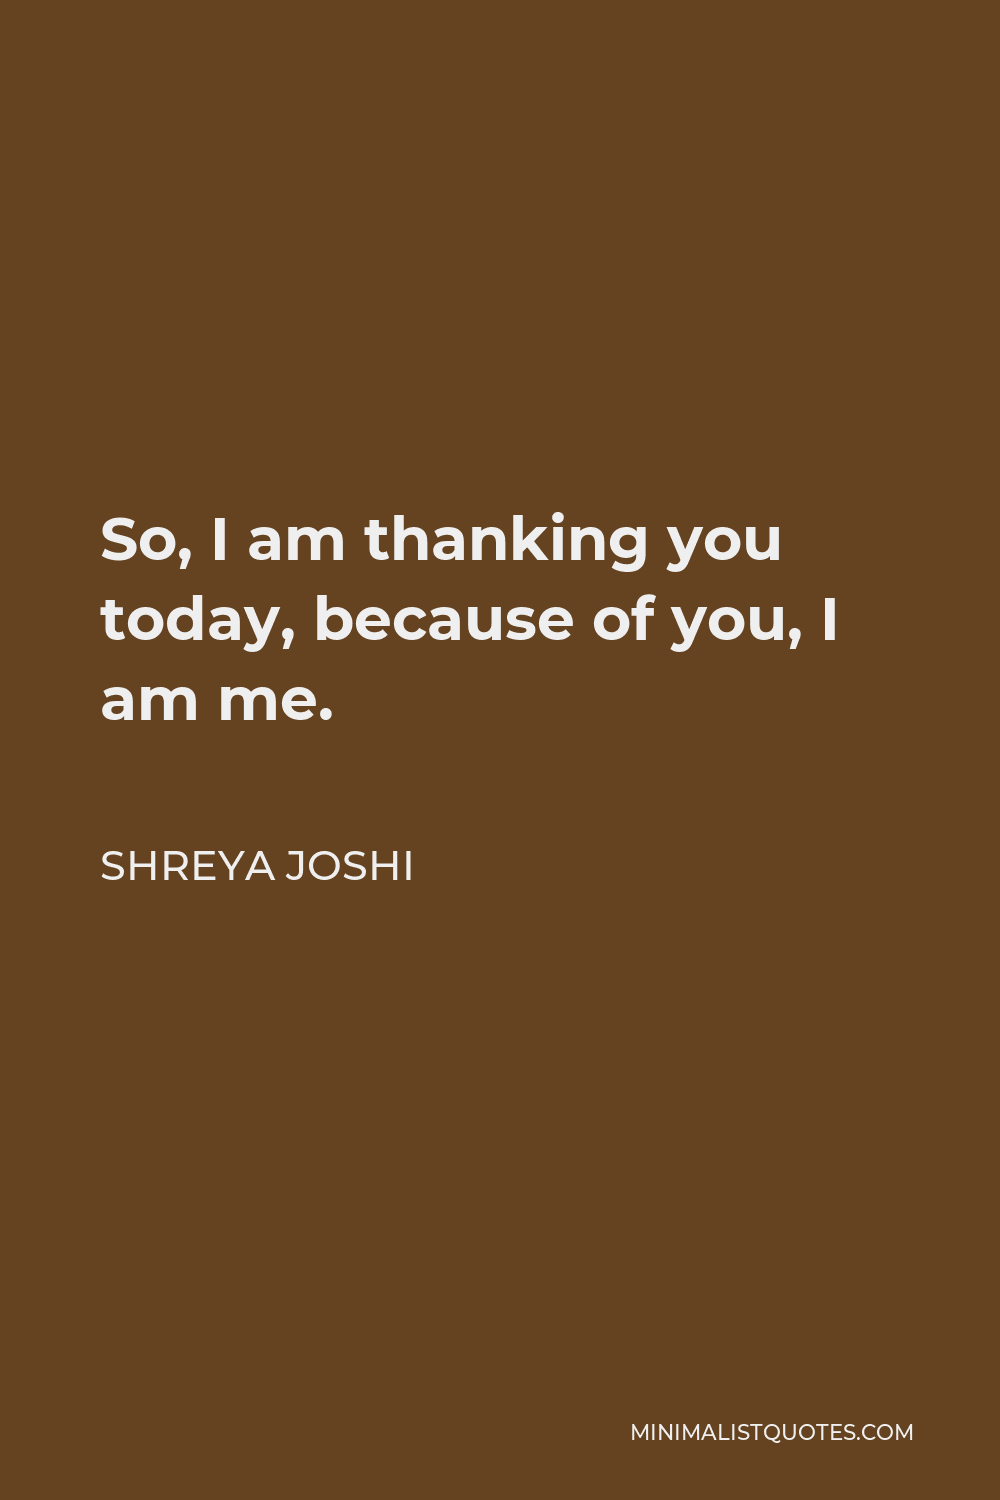 Shreya Joshi Quote - So, I am thanking you today, because of you, I am me.